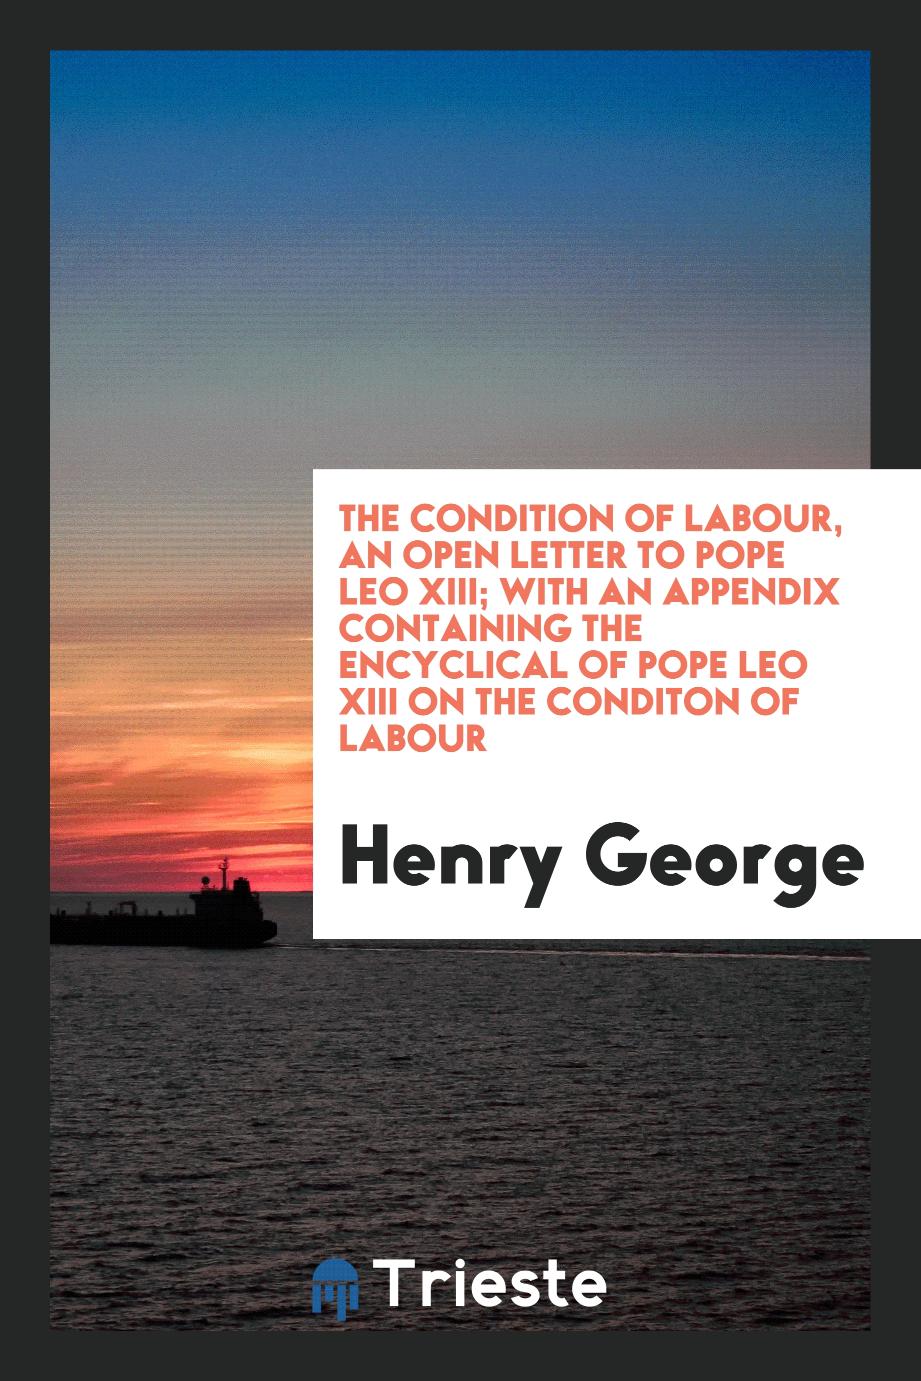 The condition of labour, an open letter to Pope Leo XIII; with an appendix containing the encyclical of Pope Leo XIII on the conditon of labour